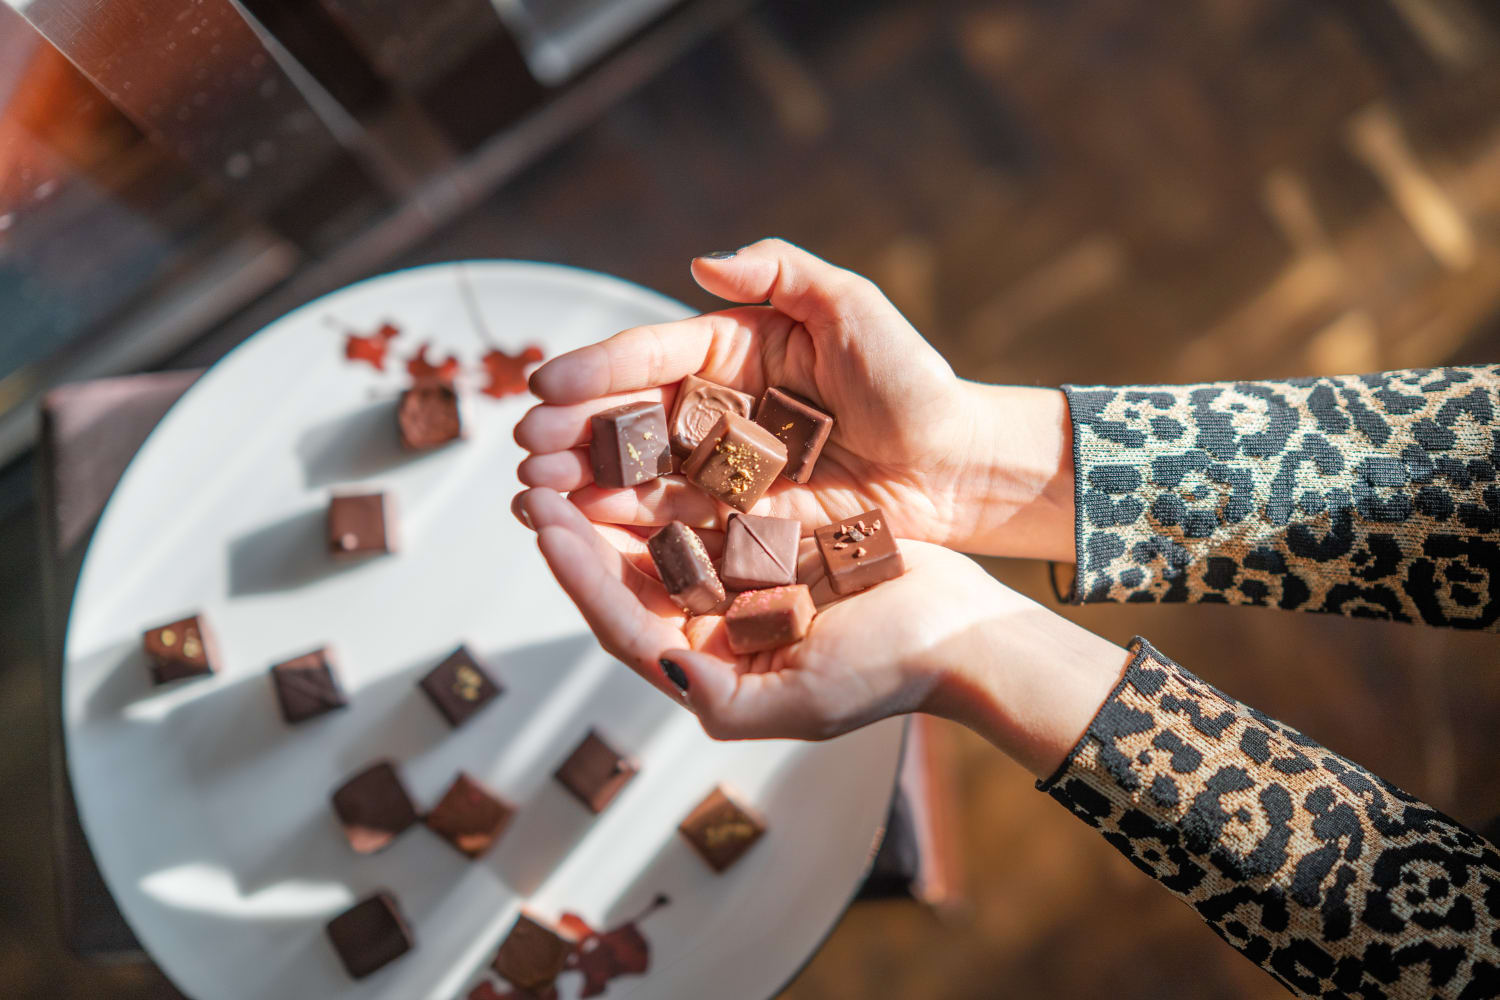 How can chocolates become harmful to our health?